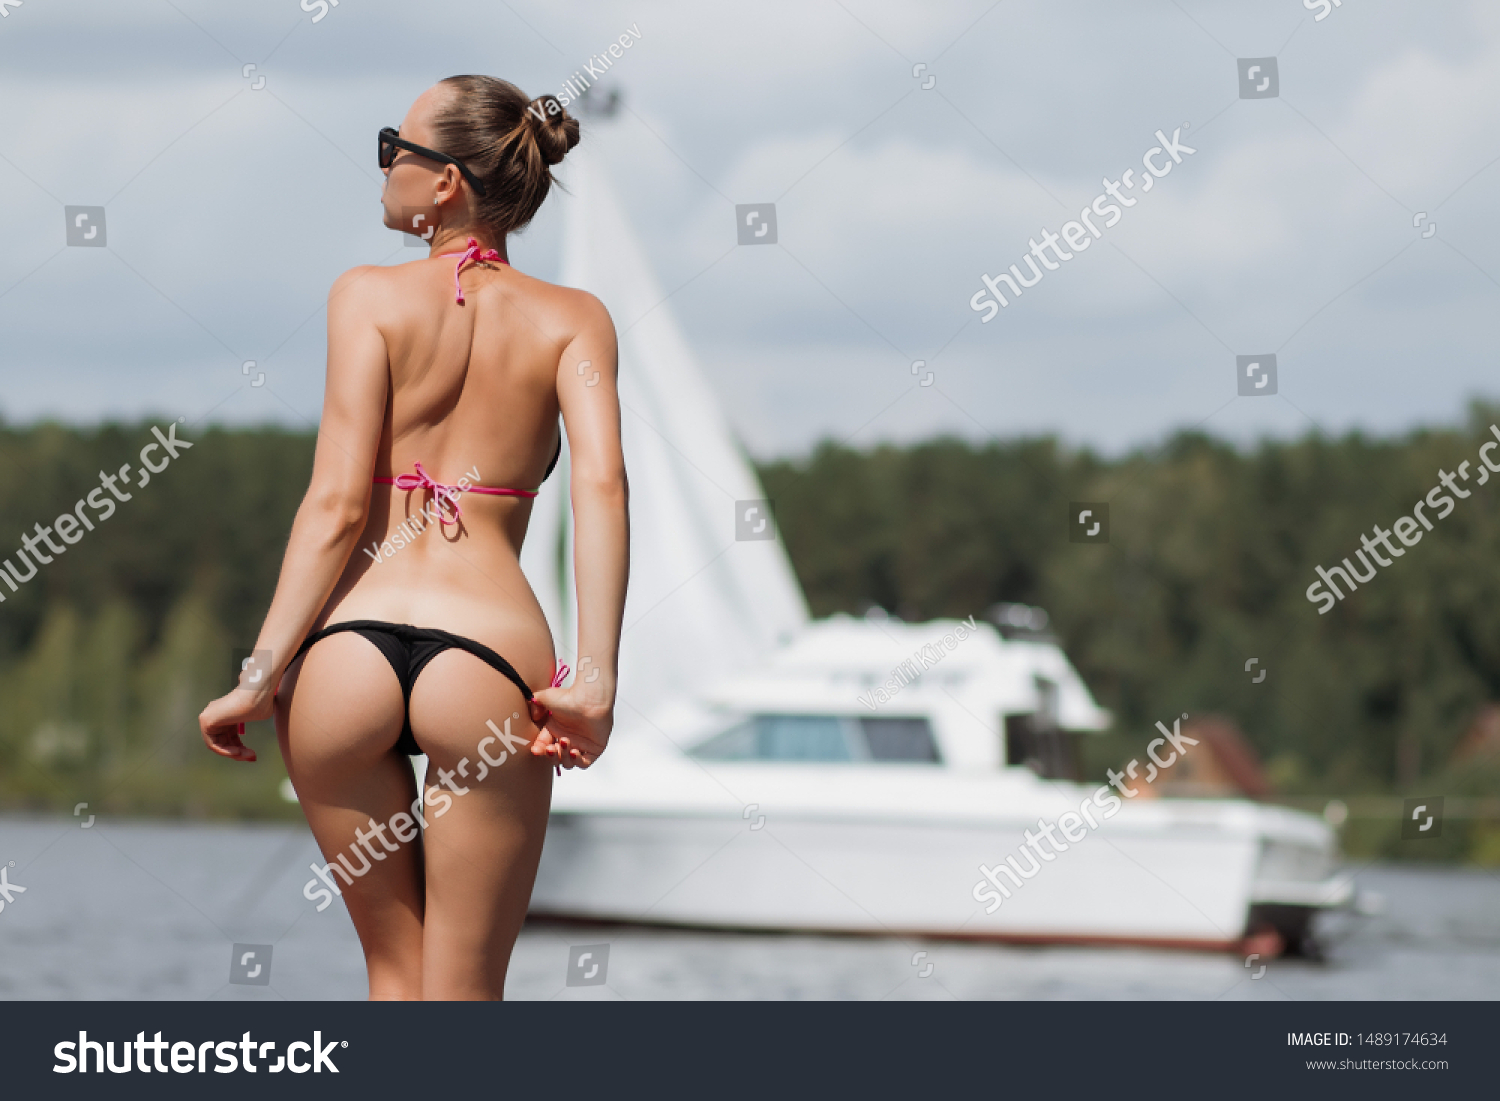 Girl Takes Off Bathing Suit e donne